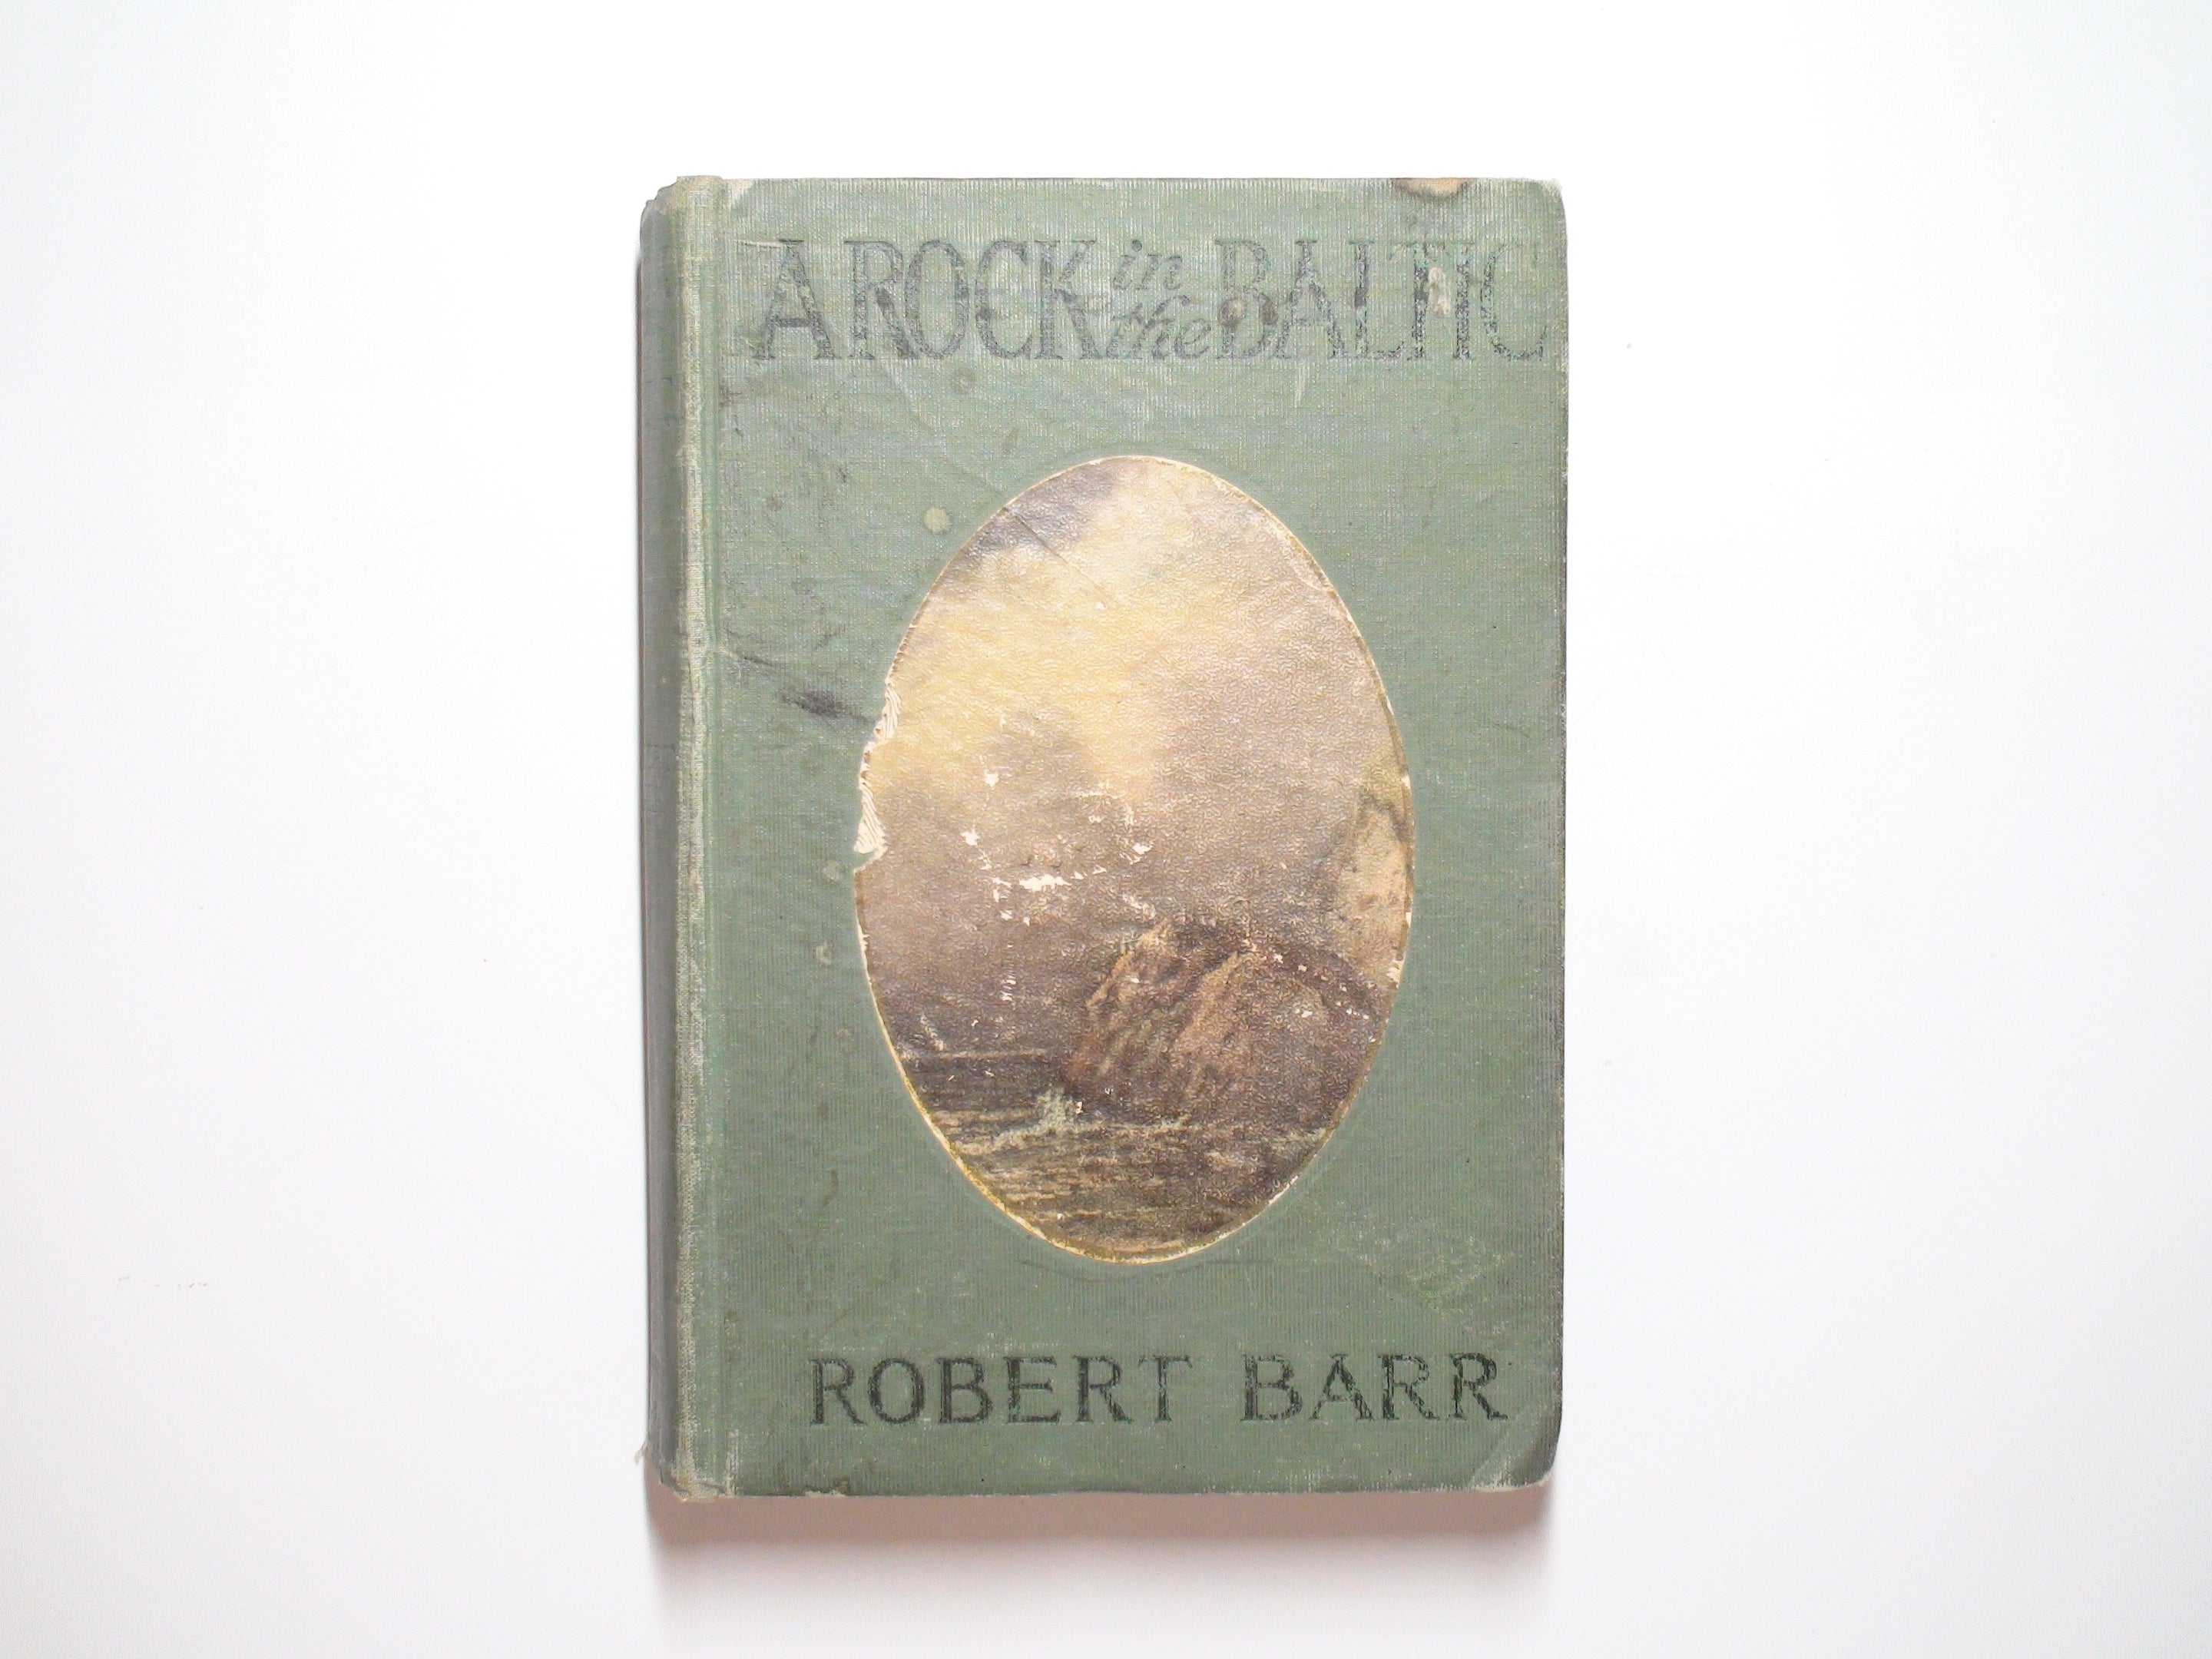 A Rock In the Baltic, by Robert Barr, Vintage Romance, 1906